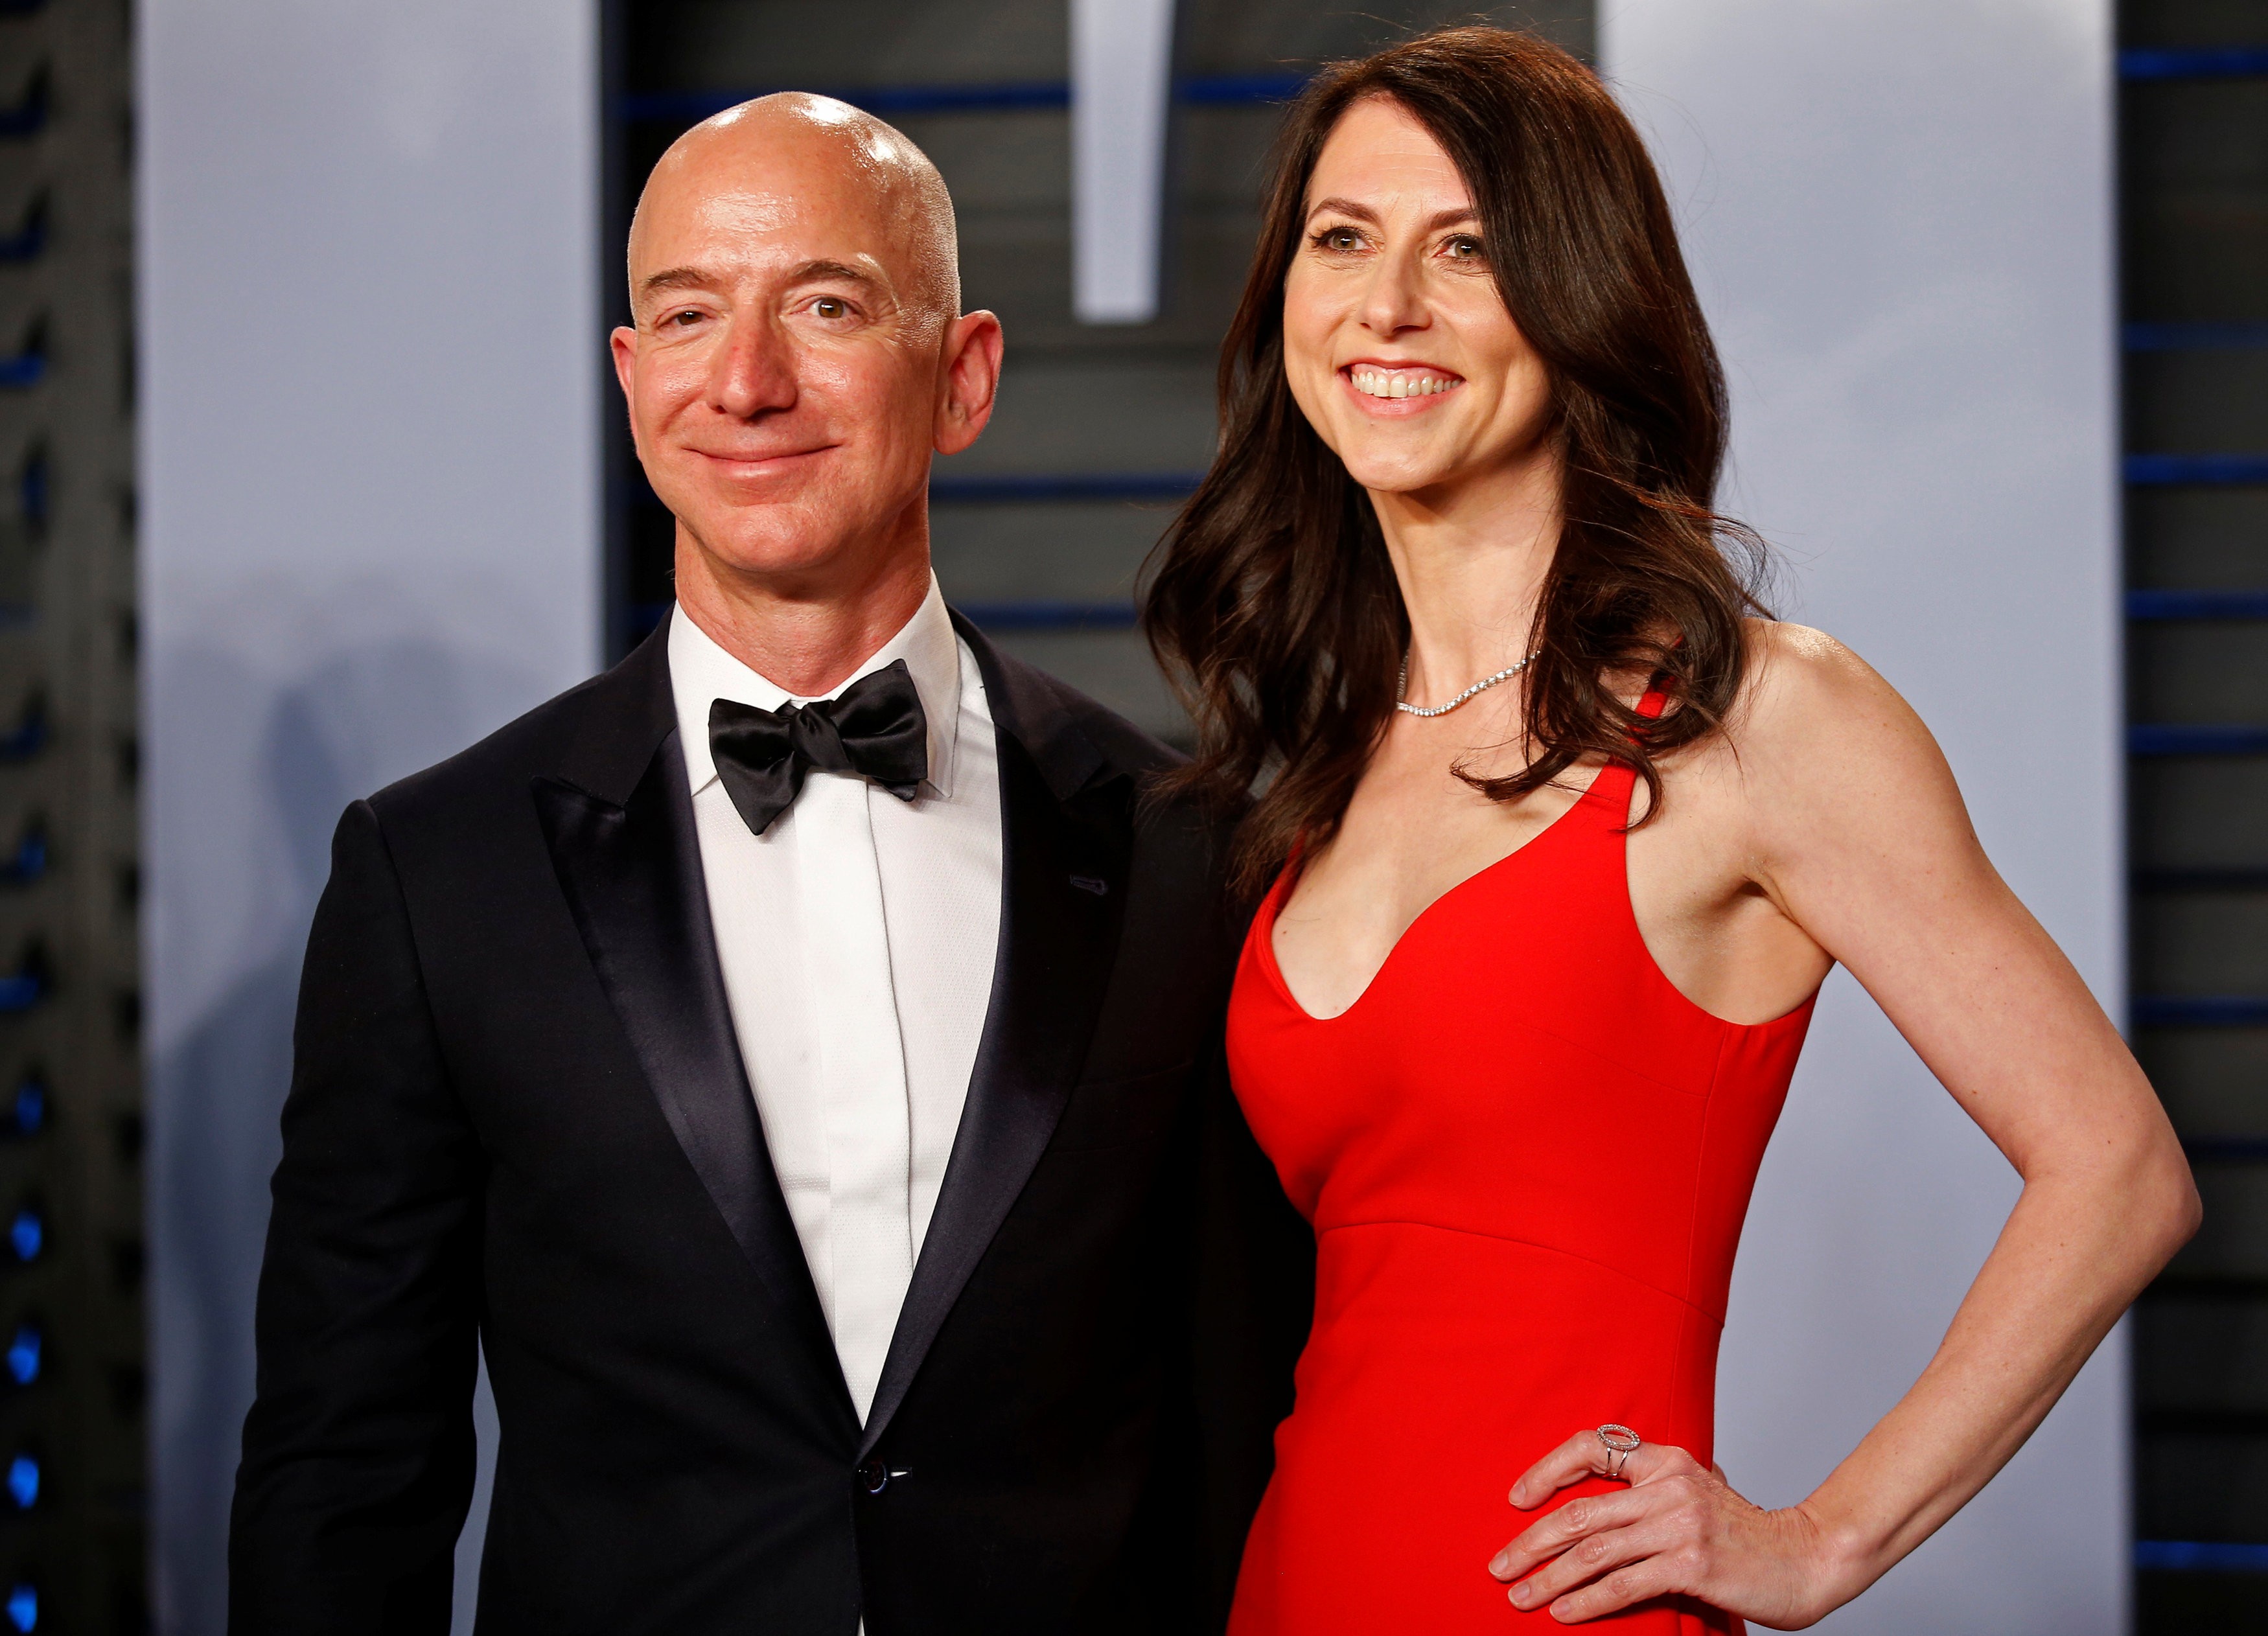 Amazon founder Jeff Bezos and wife MacKenzie are getting divorced. Photo: Reuters